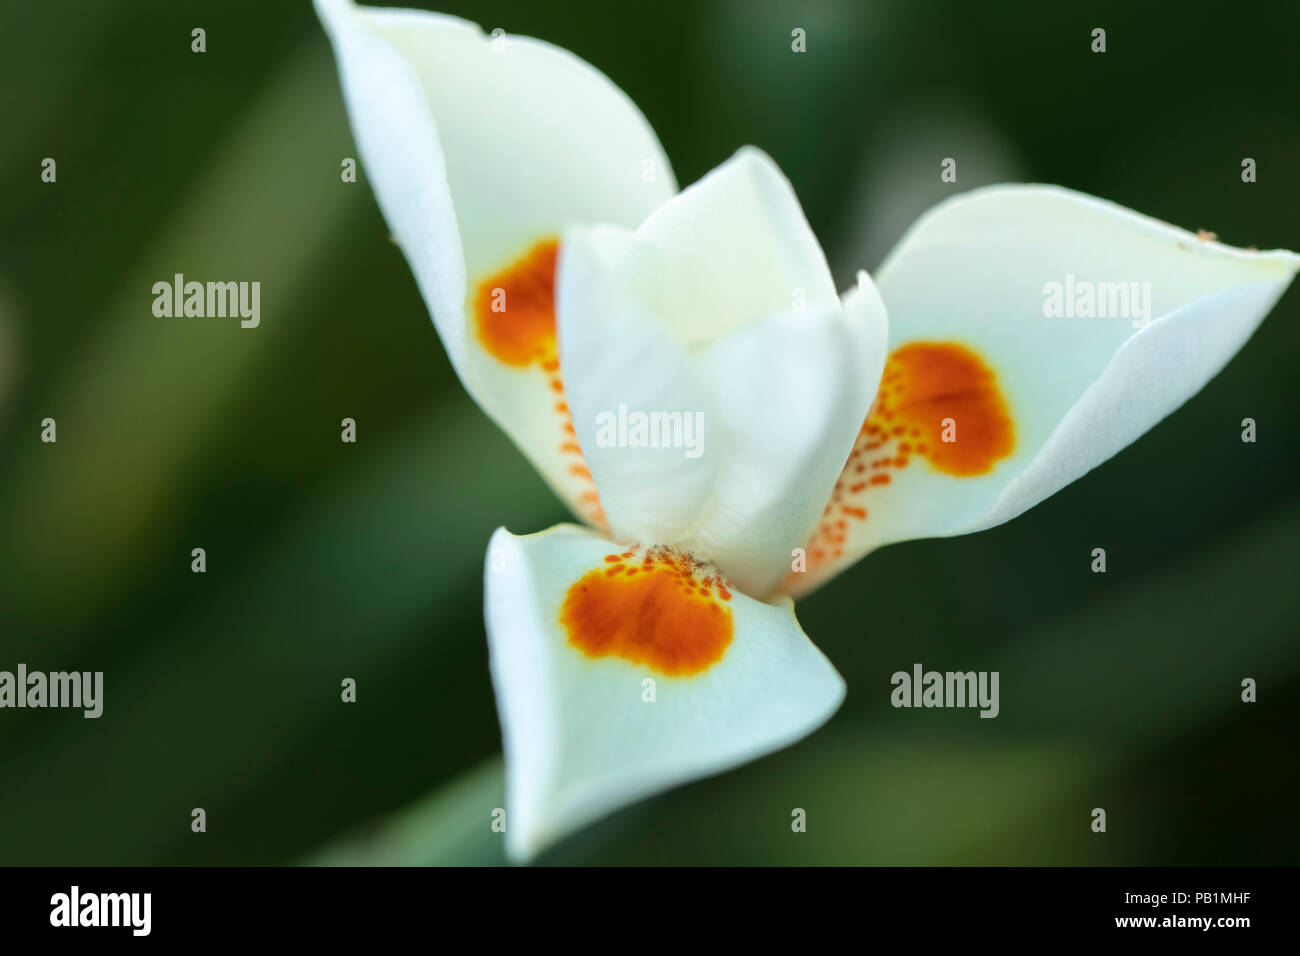 White Dietes Flower with orange and purple markings delicately blooming Stock Photo